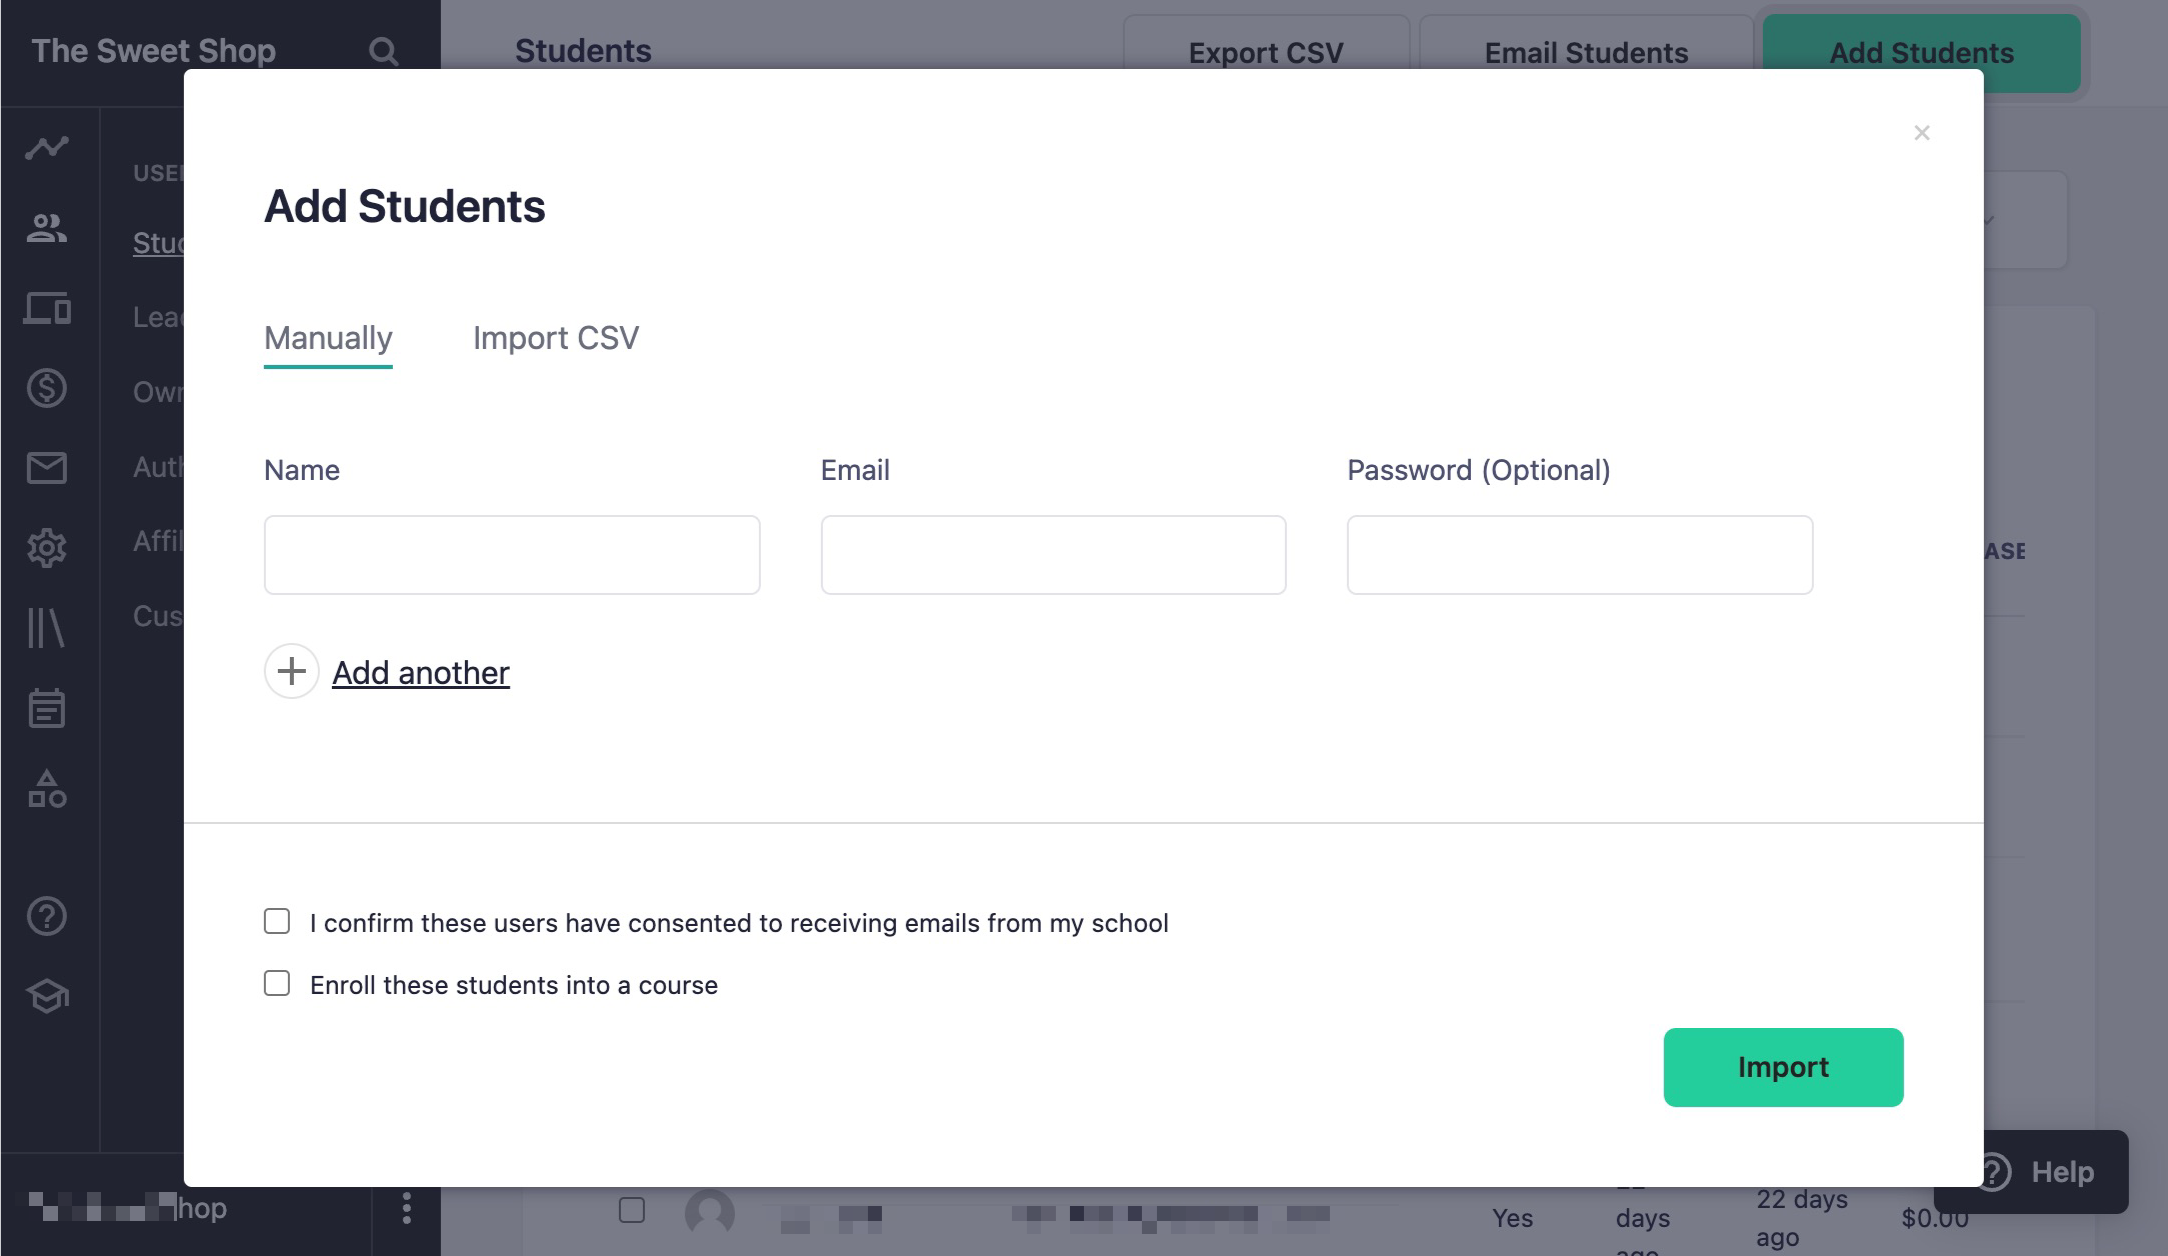 The image shows a popup window titled ADD STUDENTS, which has fields for NAME, EMAIL, and PASSWORD. There are checkbox fields for email consent and enrollment into a course, with a IMPORT button at the bottom of the window.